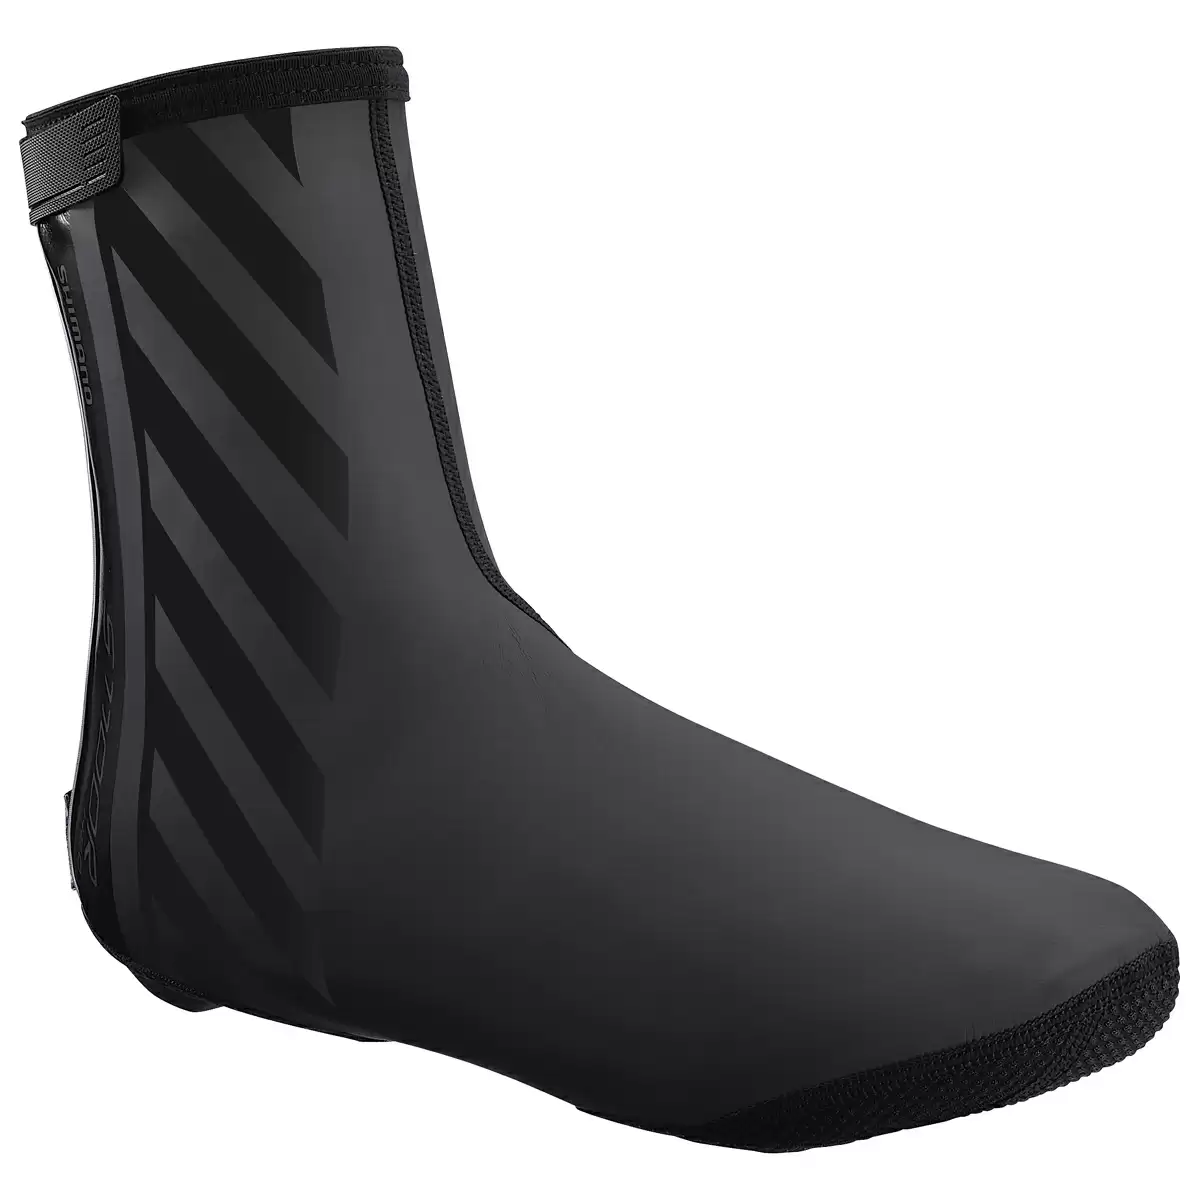 Shoe covers road S1100R H2O black size M (40-42) - image